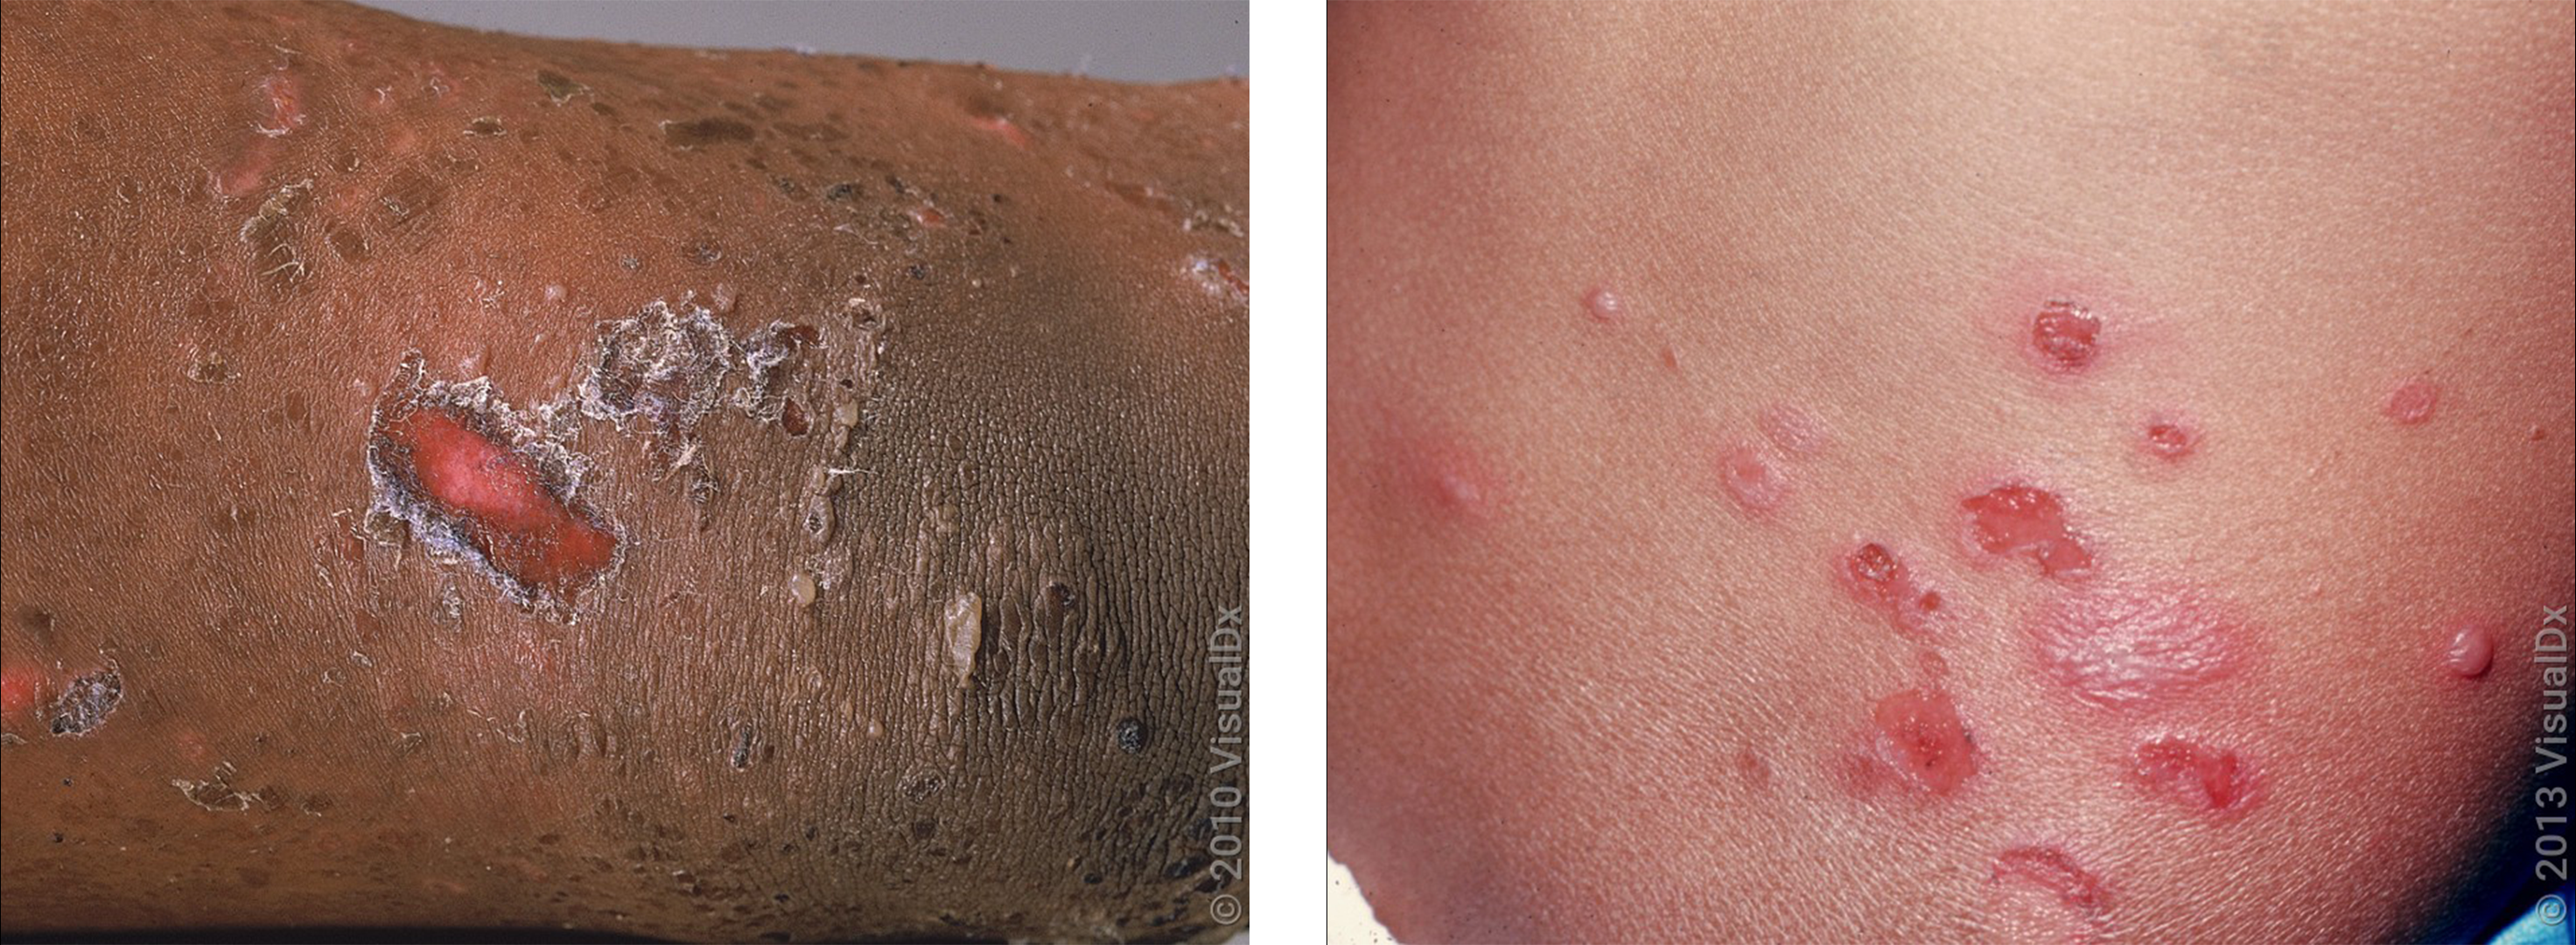 Left: An open sore and crusting on the skin. Right: Close-up of open sores on the skin.